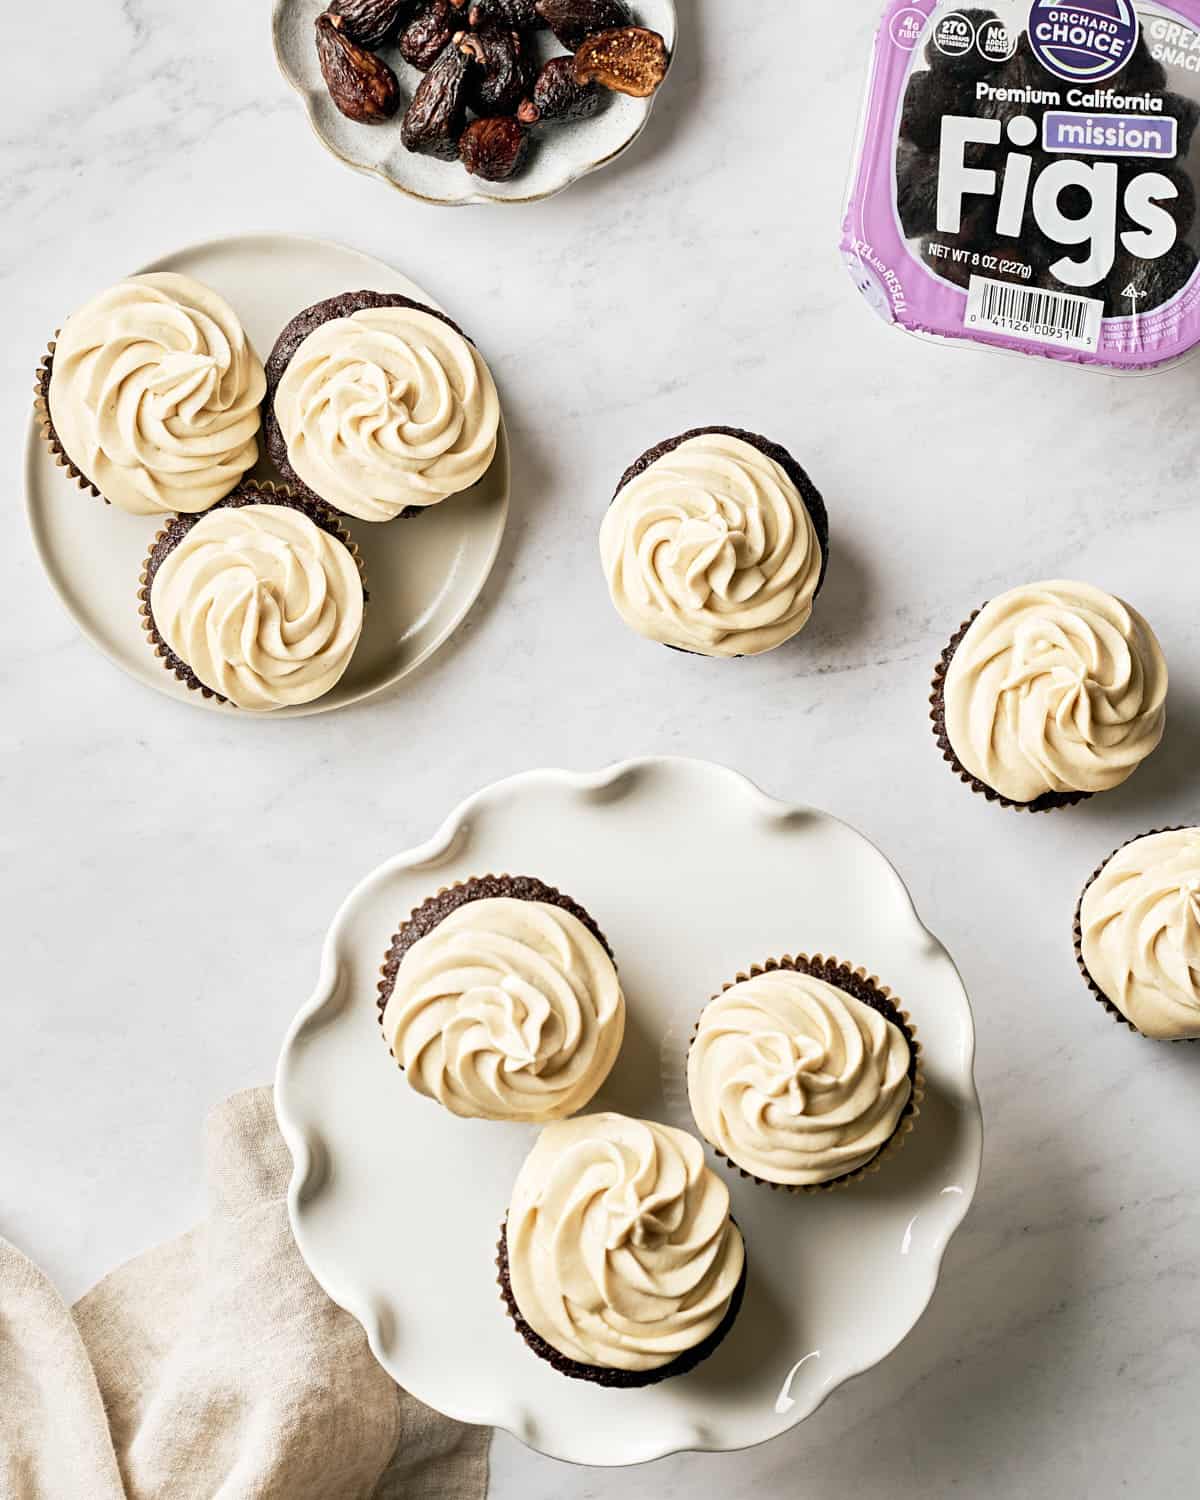 Overhead view of vegan chocolate fig cupcakes on marble background.